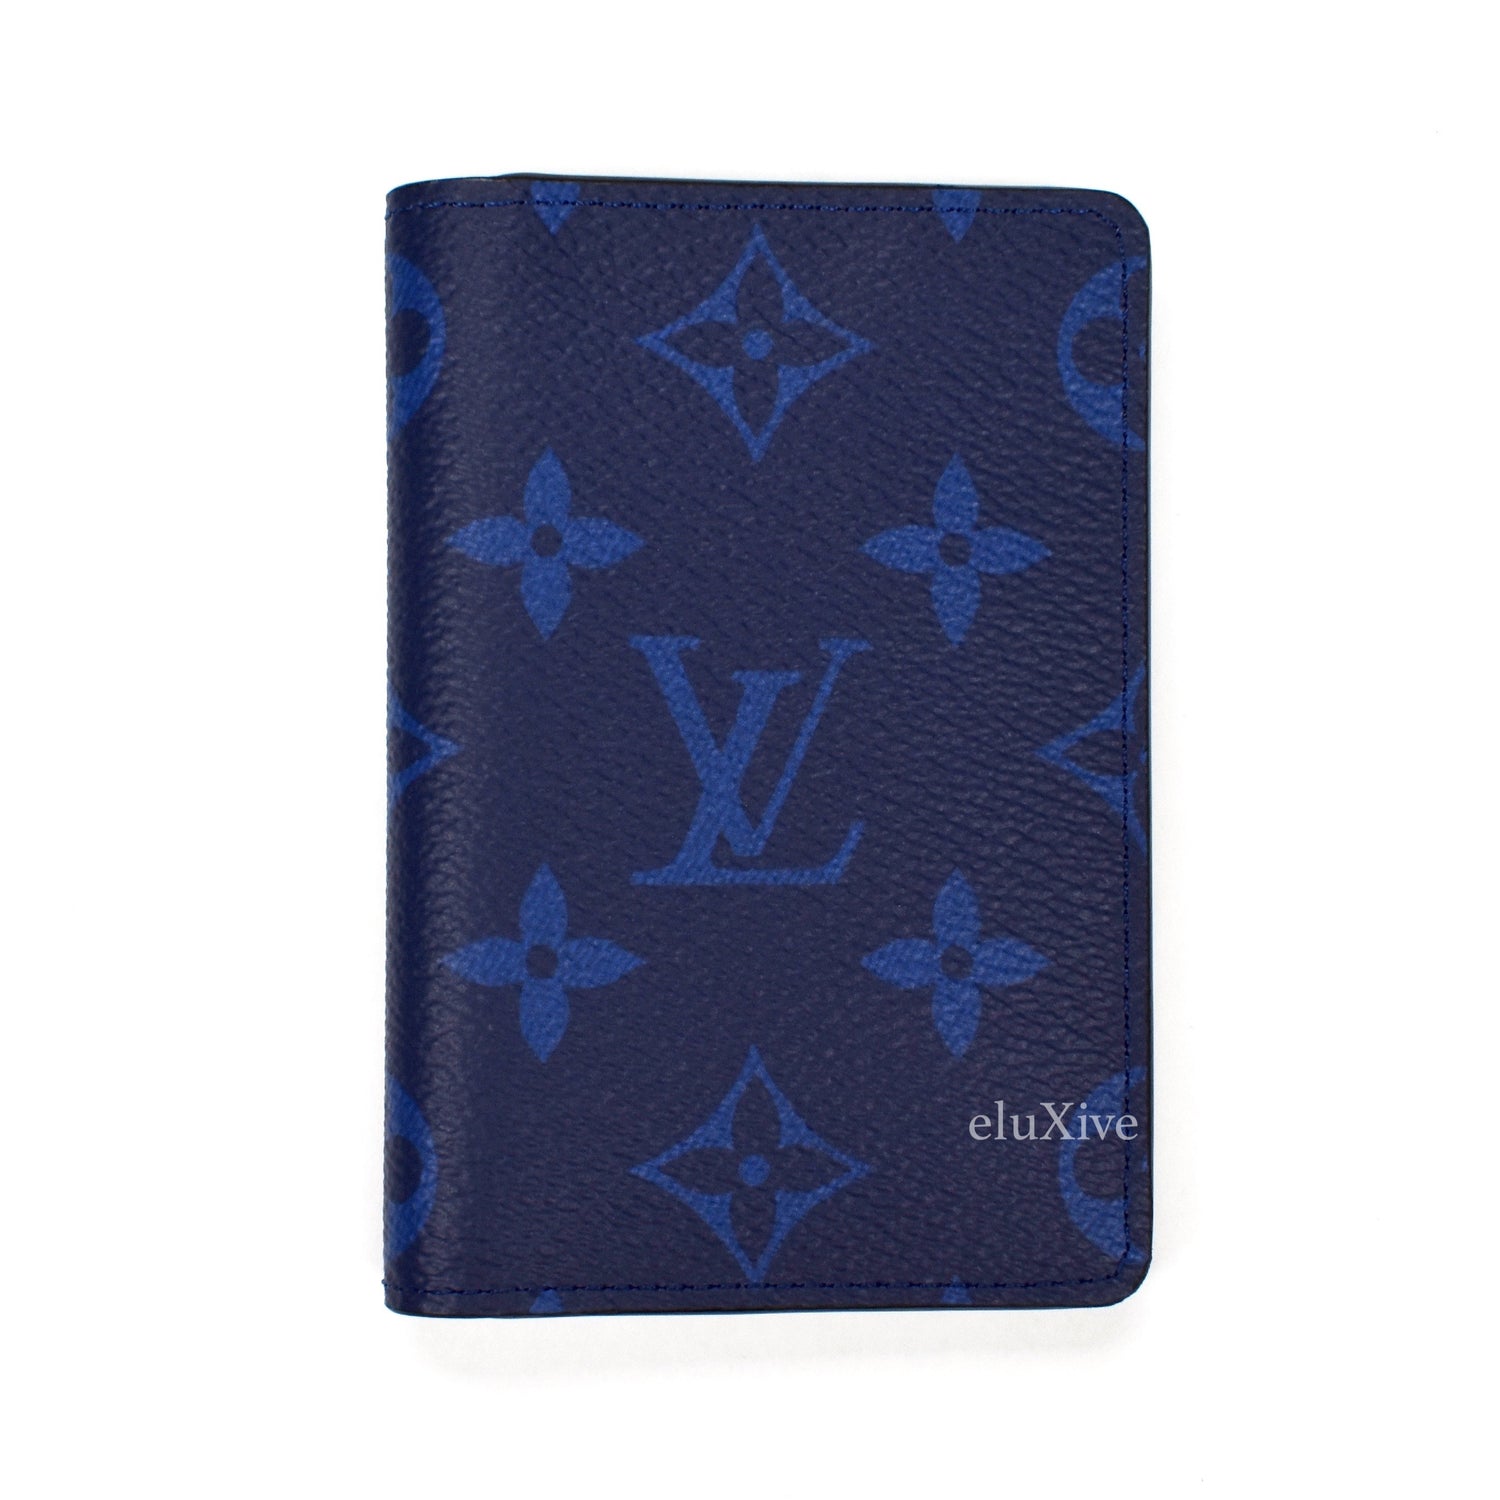 Extremely Rare Louis Vuitton Virgil Abloh Watercolor Wallet on